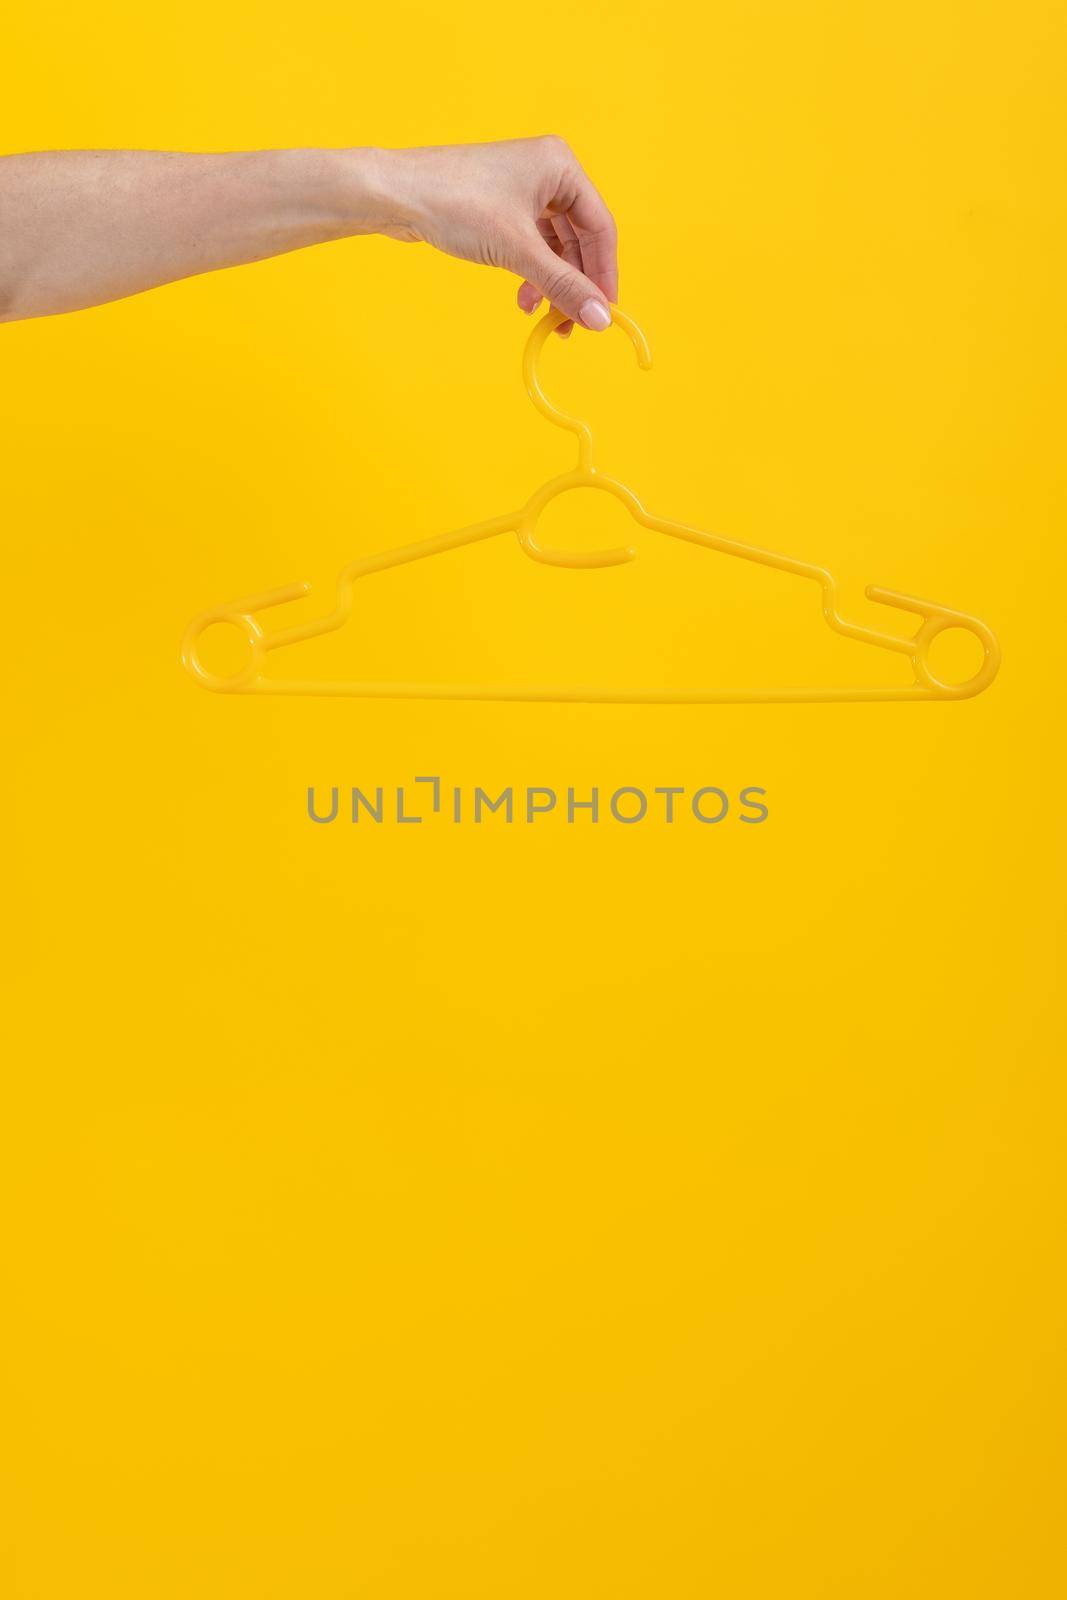 Hand holding hanger isolated on yellow background with copyspace. Stylish design look on fashion accessory. Concept of clothes retail